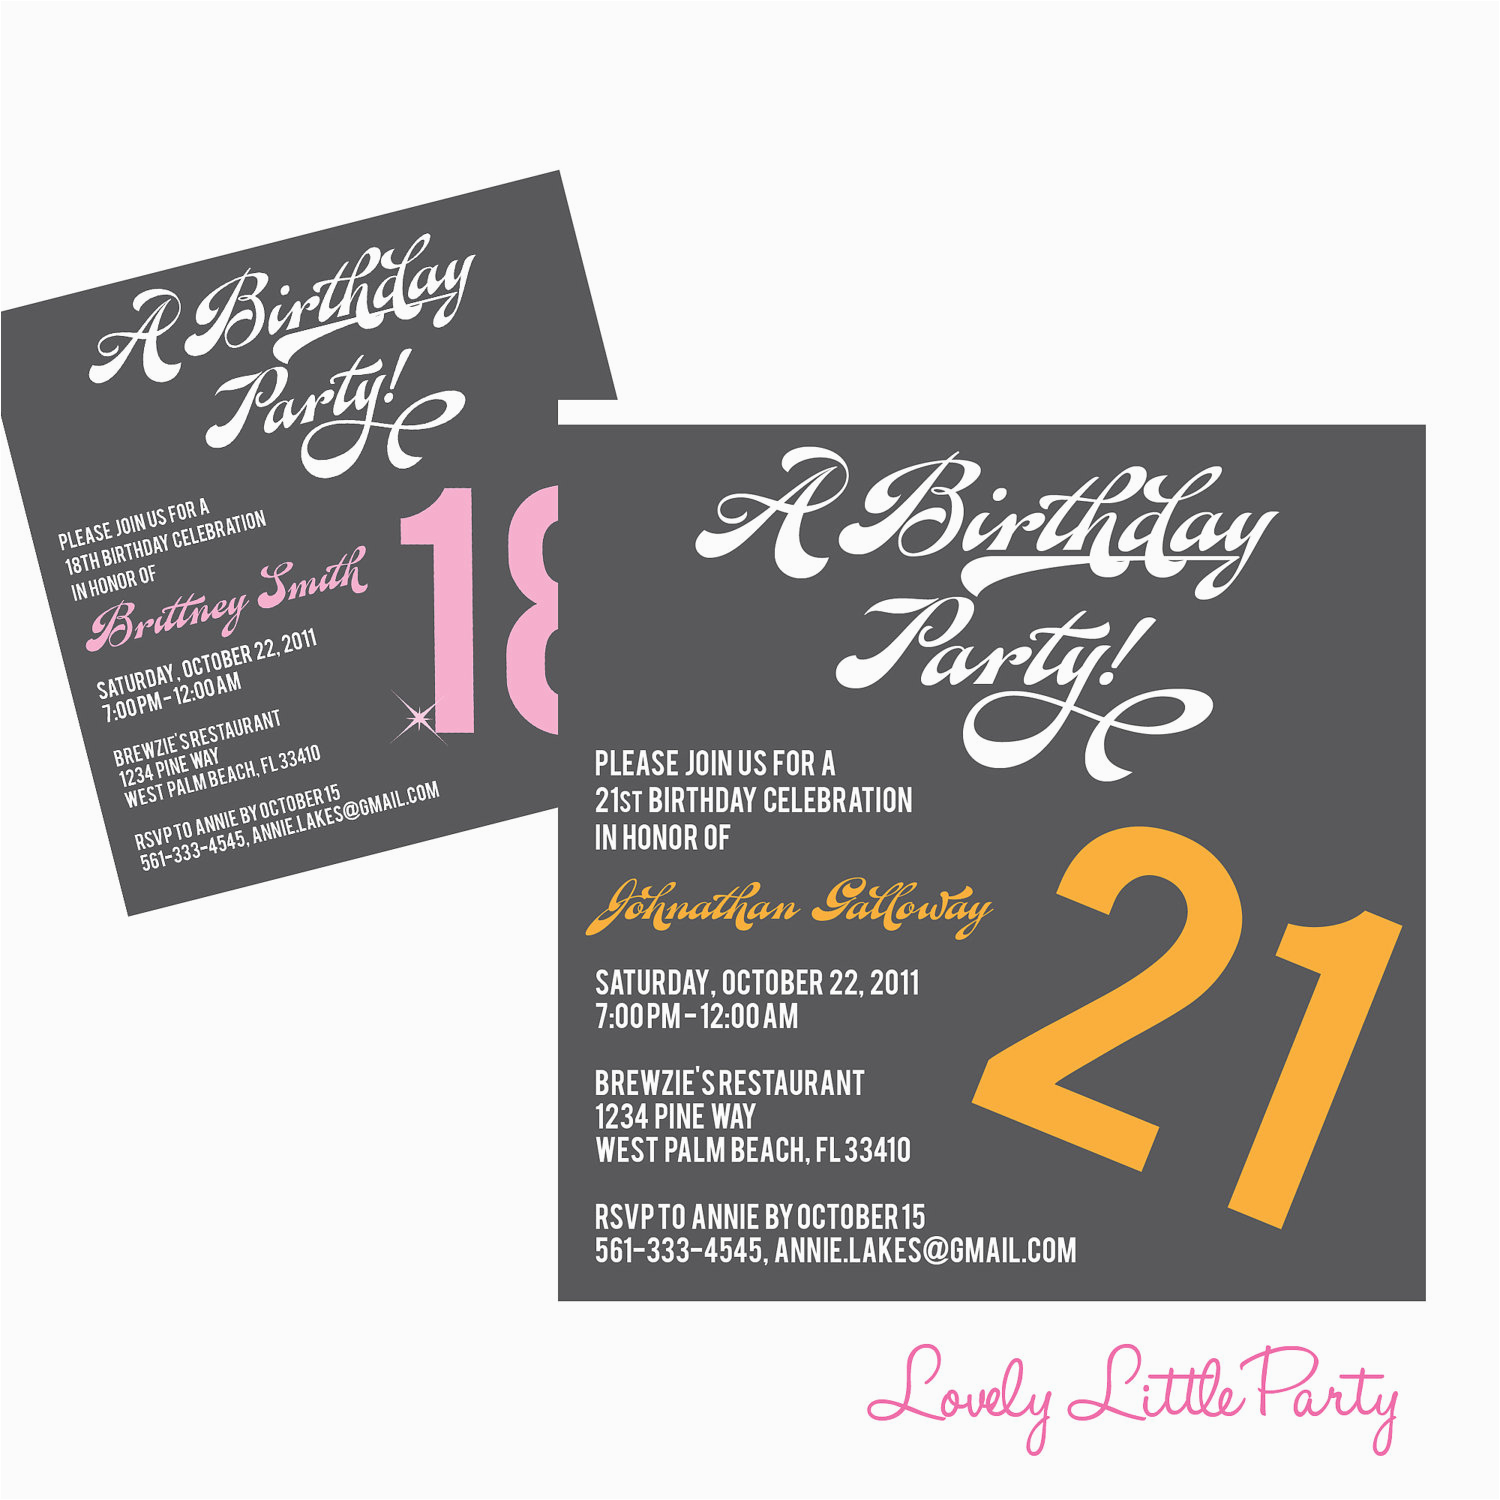 party invitations free example adult birthday party